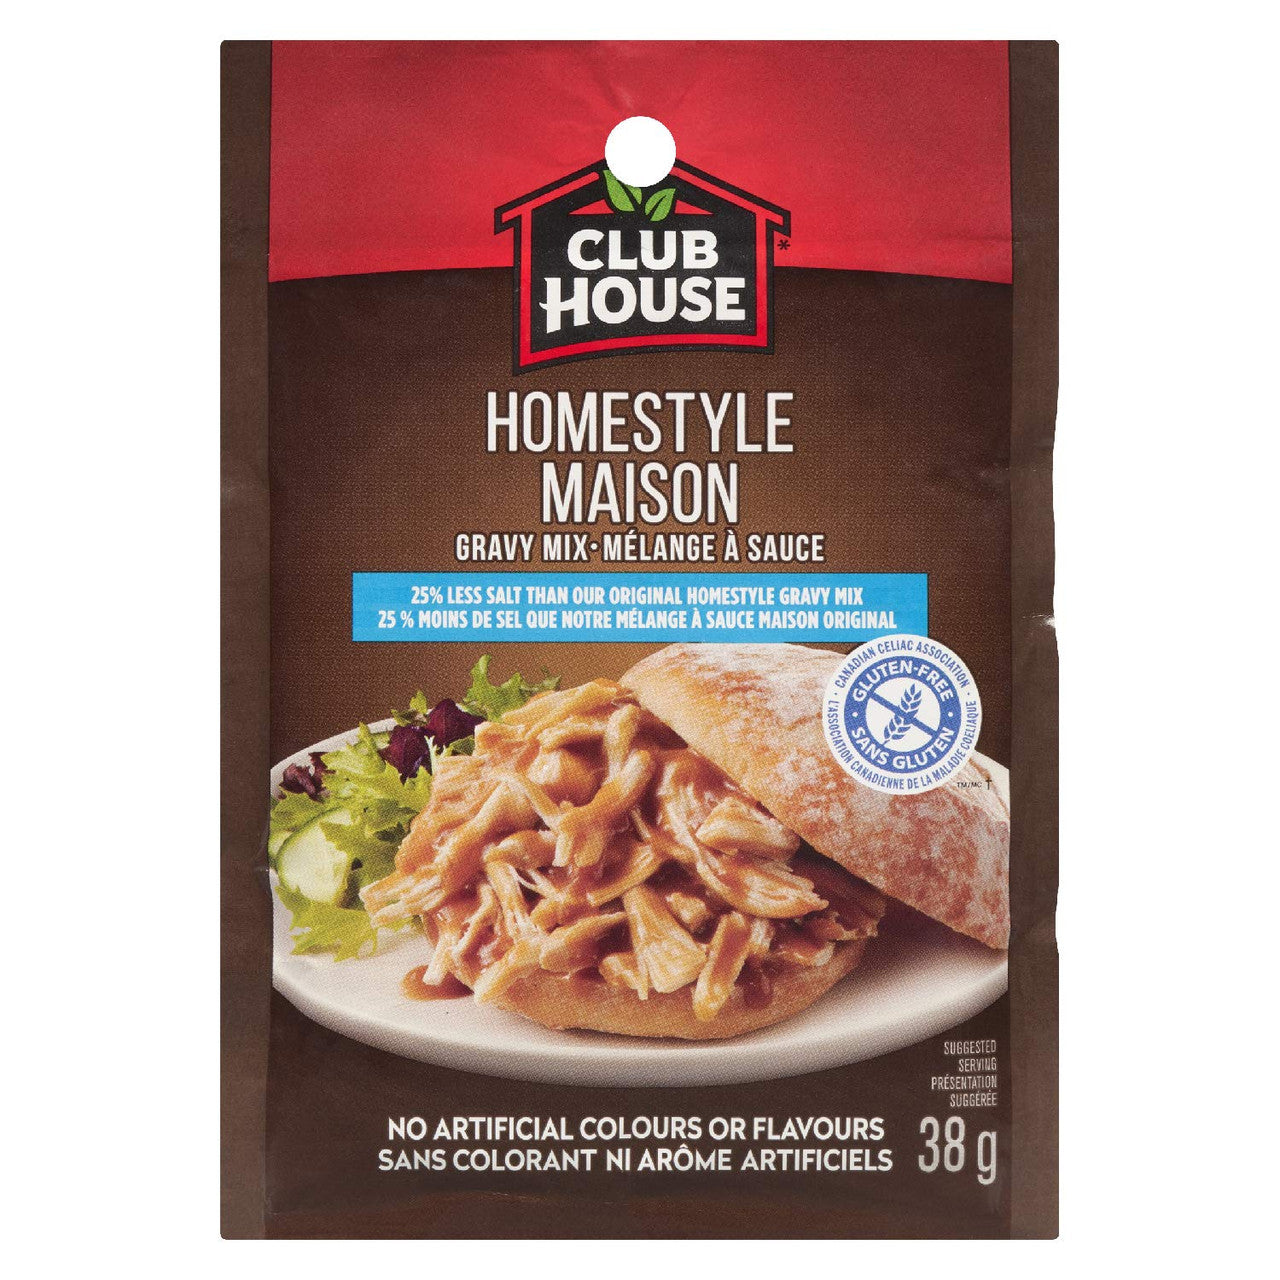 Club House, 25% less Salt, Homestyle Gravy Mix, 38g/1.3oz., (12pk) {Imported from Canada}